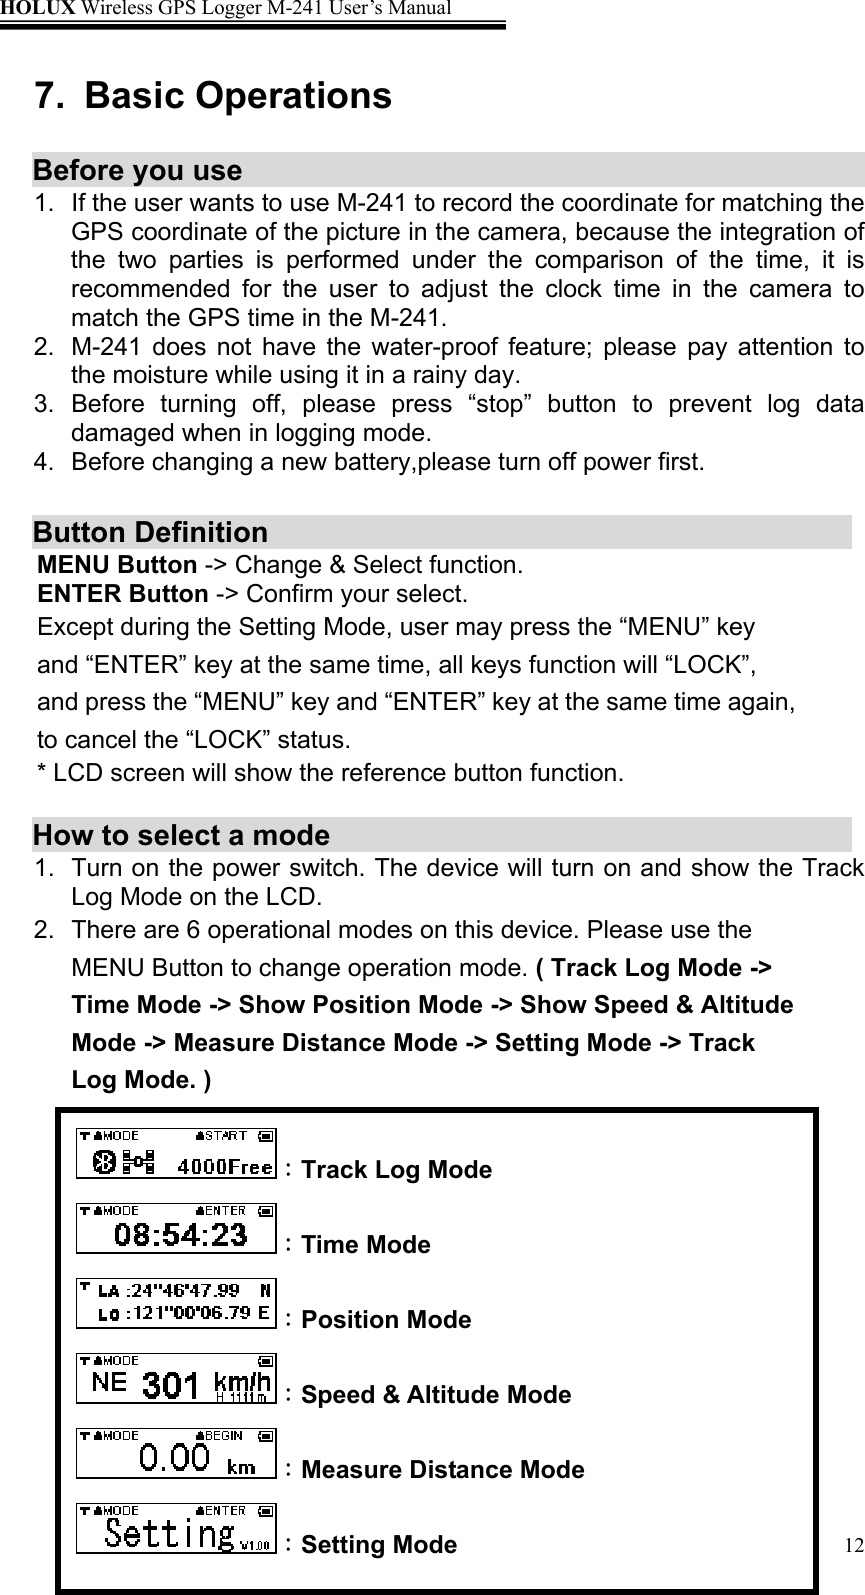 HOLUX Wireless GPS Logger M-241 User’s Manual   127. Basic Operations  Before you use                                      1.  If the user wants to use M-241 to record the coordinate for matching the GPS coordinate of the picture in the camera, because the integration of the two parties is performed under the comparison of the time, it is recommended for the user to adjust the clock time in the camera to match the GPS time in the M-241. 2.  M-241 does not have the water-proof feature; please pay attention to the moisture while using it in a rainy day. 3. Before turning off, please press “stop” button to prevent log data damaged when in logging mode.   4.  Before changing a new battery,please turn off power first.    Button Definition     MENU Button -&gt; Change &amp; Select function. ENTER Button -&gt; Confirm your select. Except during the Setting Mode, user may press the “MENU” key and “ENTER” key at the same time, all keys function will “LOCK”, and press the “MENU” key and “ENTER” key at the same time again, to cancel the “LOCK” status. * LCD screen will show the reference button function.  How to select a mode   1.  Turn on the power switch. The device will turn on and show the Track Log Mode on the LCD. 2.  There are 6 operational modes on this device. Please use the MENU Button to change operation mode. ( Track Log Mode -&gt; Time Mode -&gt; Show Position Mode -&gt; Show Speed &amp; Altitude Mode -&gt; Measure Distance Mode -&gt; Setting Mode -&gt; Track Log Mode. )       ：Track Log Mode ：Time Mode ：Position Mode ：Speed &amp; Altitude Mode ：Measure Distance Mode ：Setting Mode 